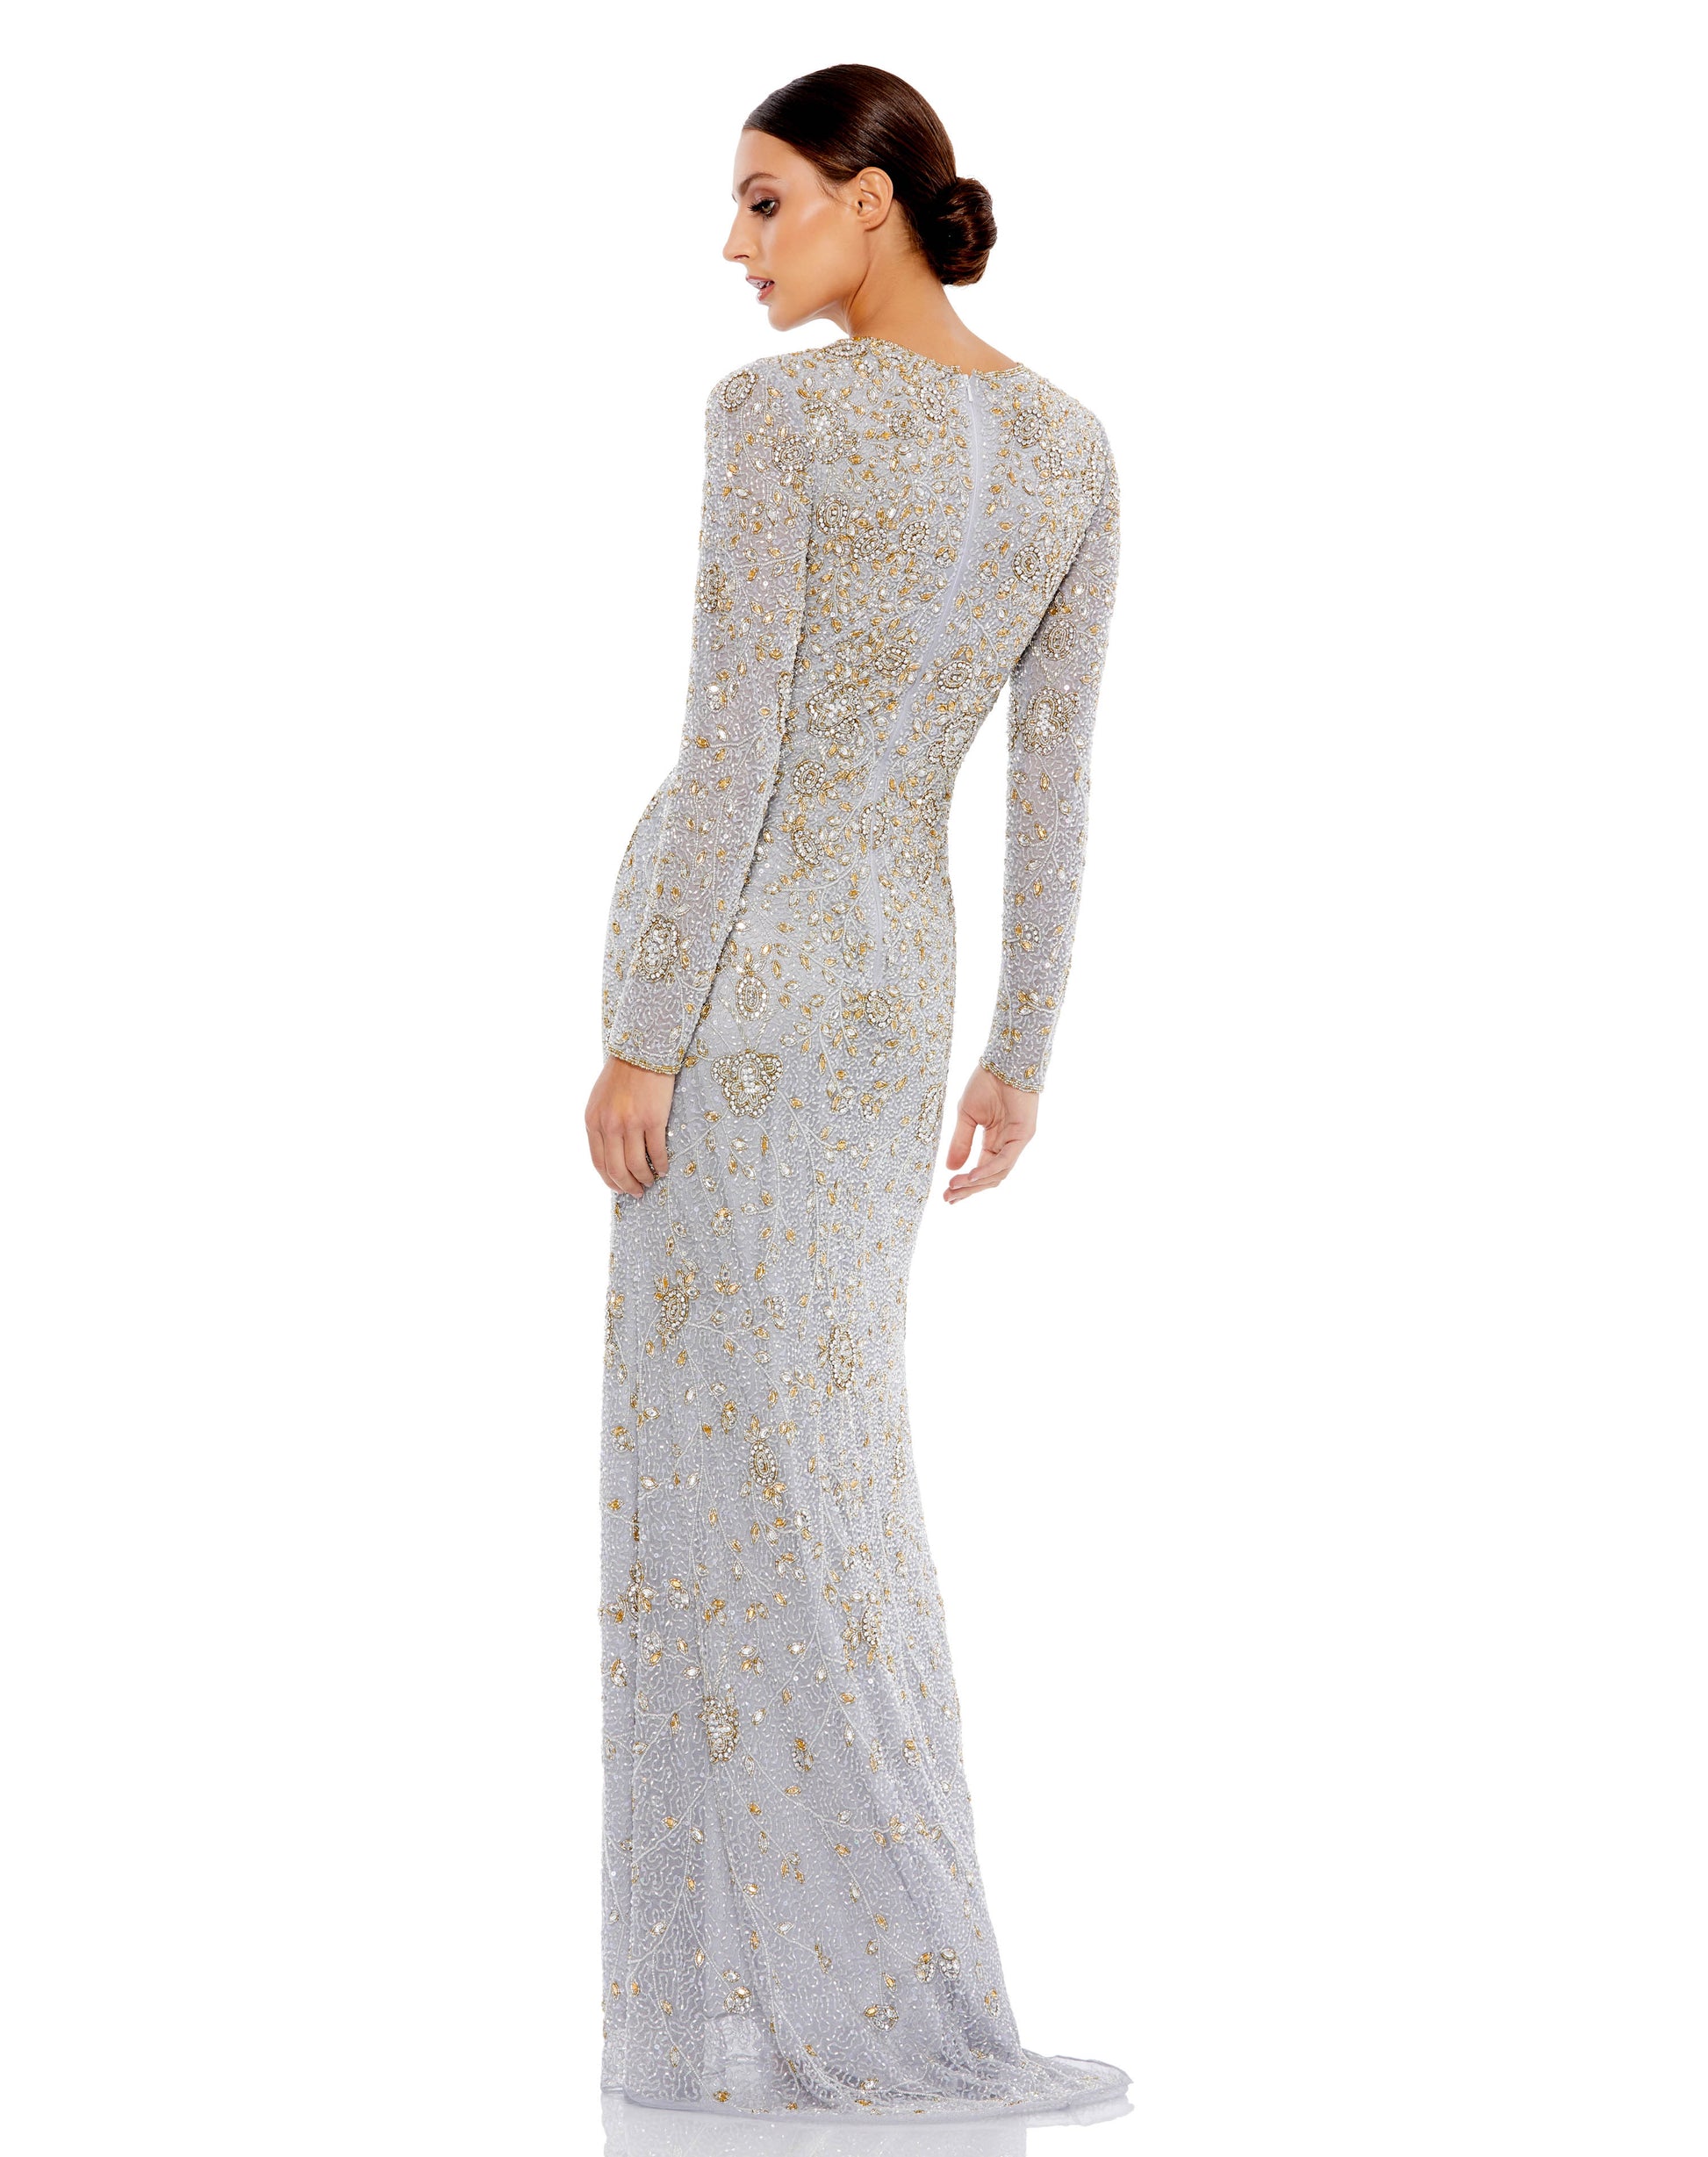 Elegant long-sleeved evening gown adorned with hand-sewn beading and intricate rhinestone detailing throughout. Mac Duggal Fully Lined Back Zipper 100% Polyester Long Sleeve Full Length Style #5308